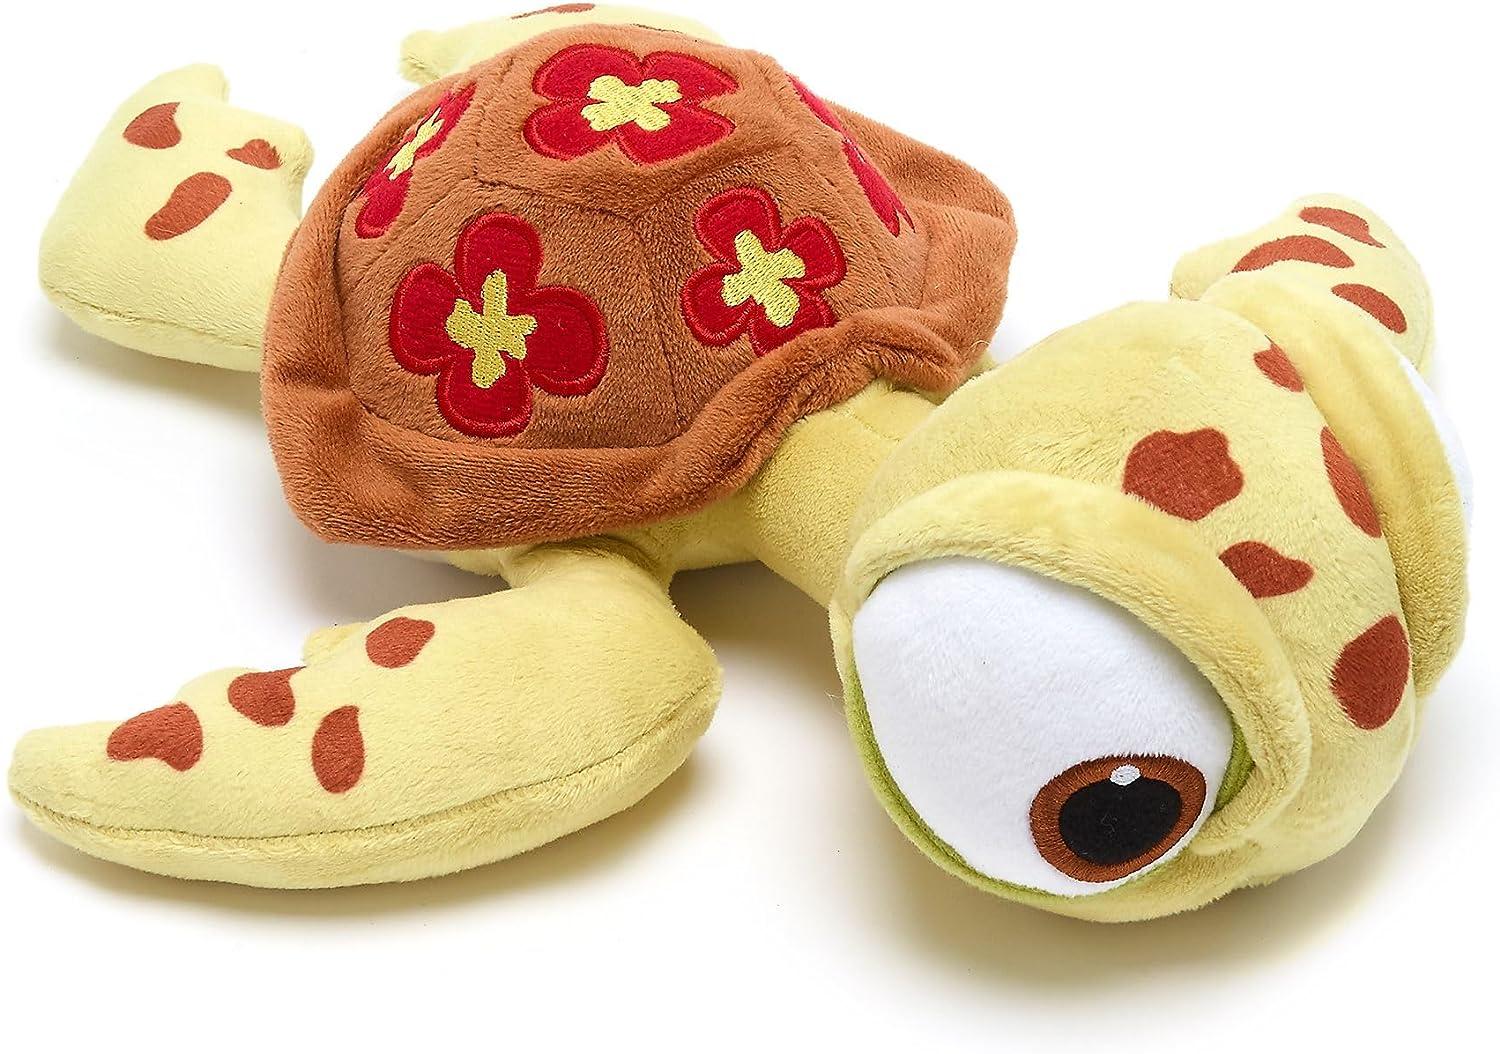 Disney Store Official TURTLE SQUIRT Small Soft Plush Toy